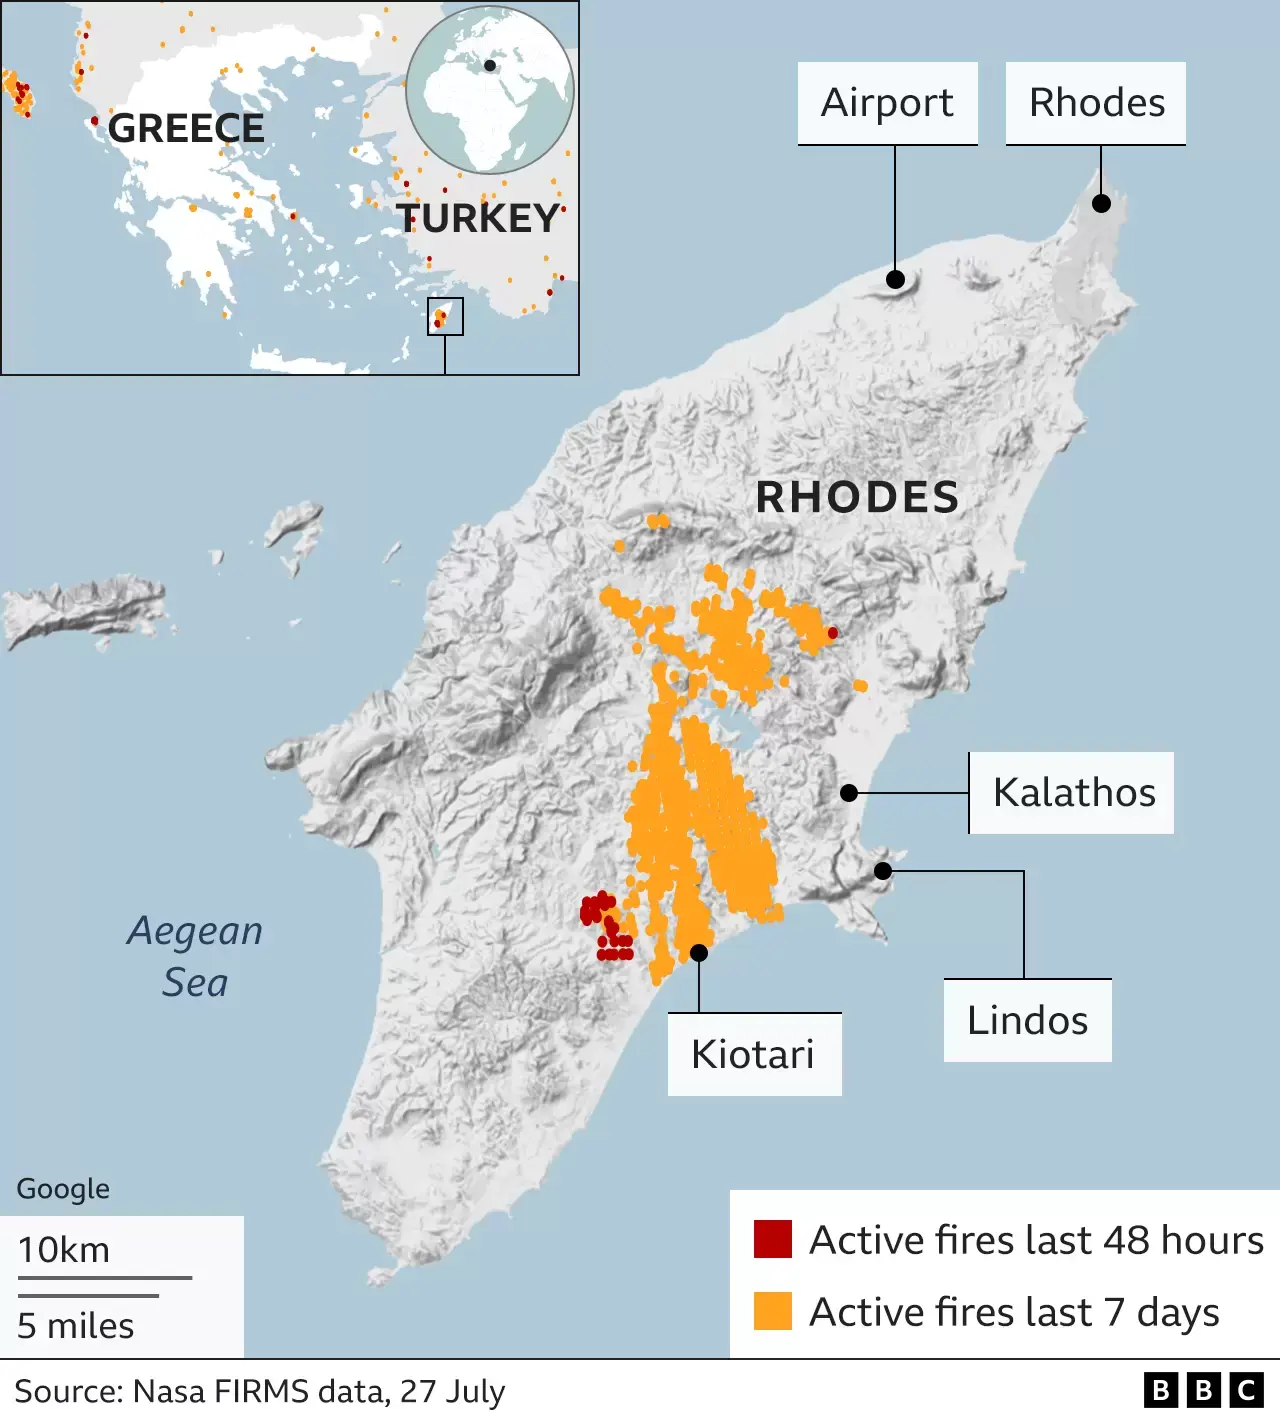 Active Rhodes Wildfires: 48-hour perimeter (as of 27th July) and 7-day prior active fires